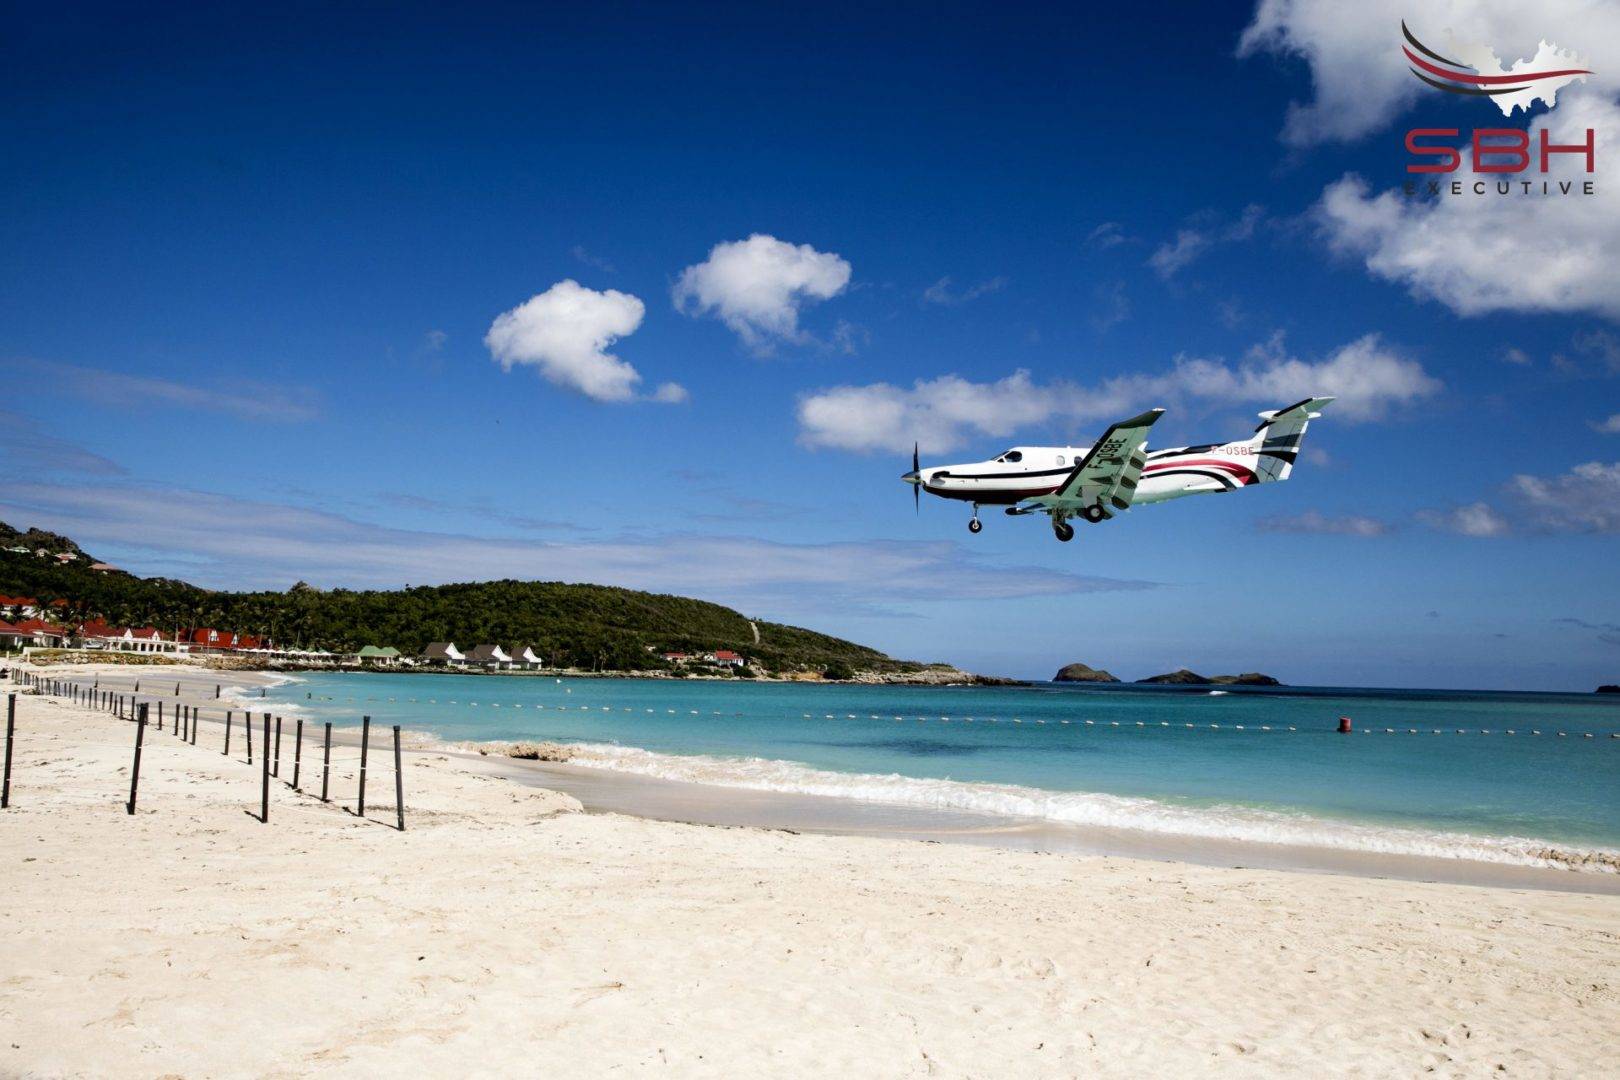 5-St-Barth-executive-Private-Charter-Flights-Airline-Airport.jpg